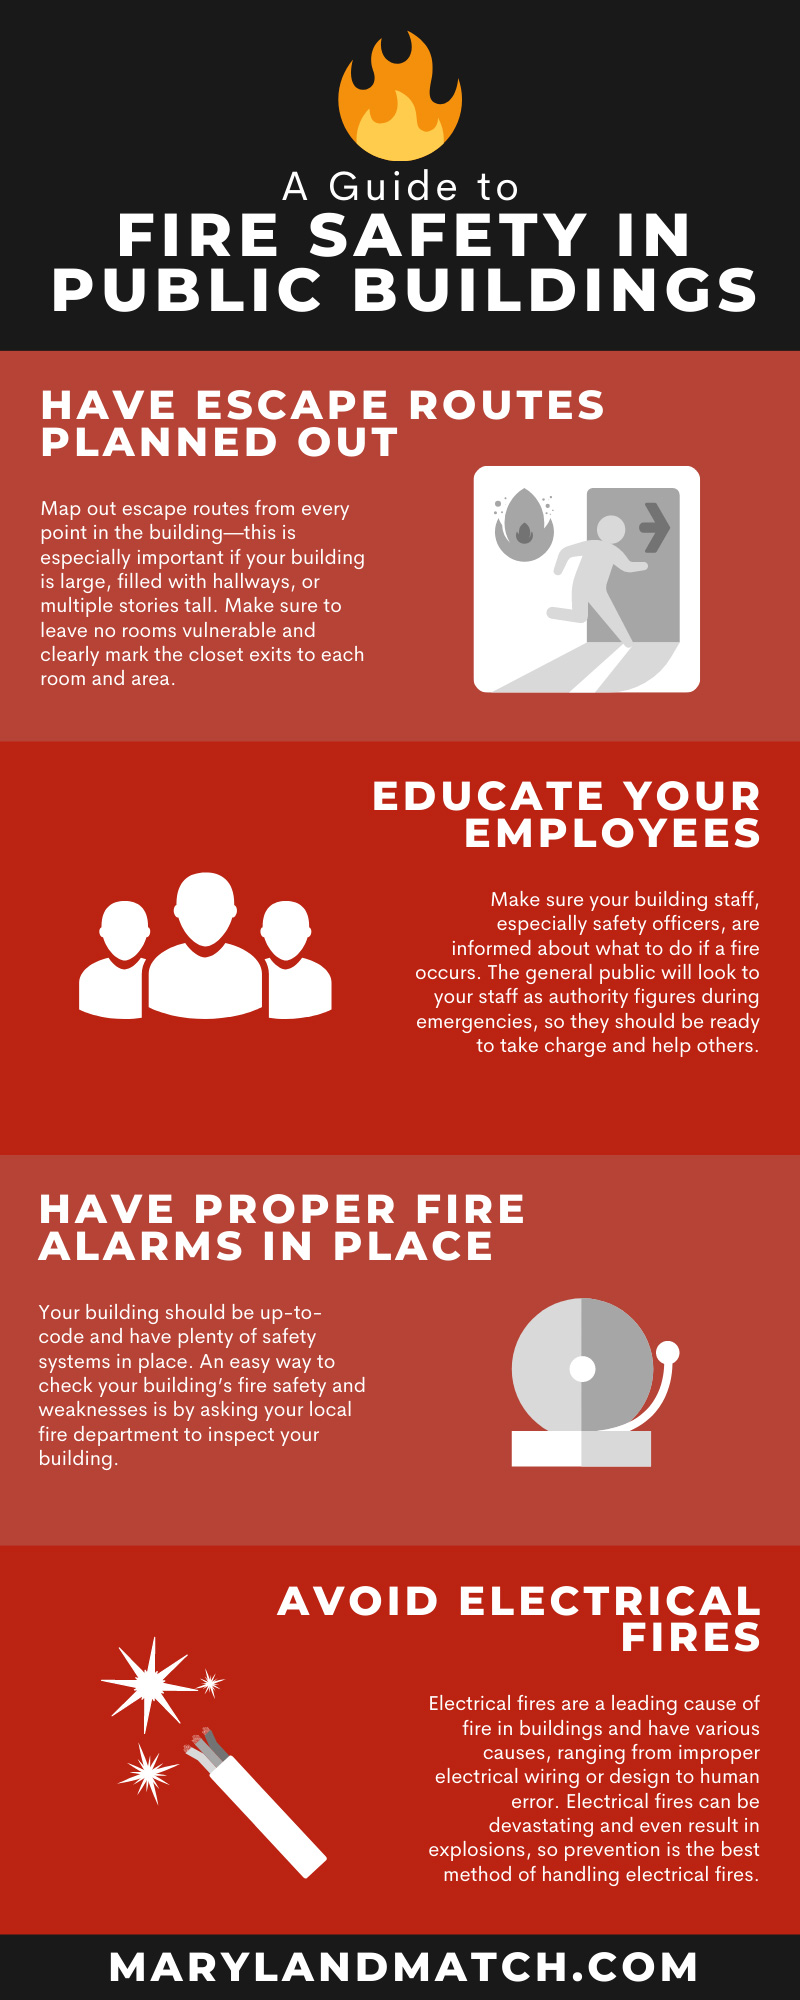 Fire Safety in Public Buildings